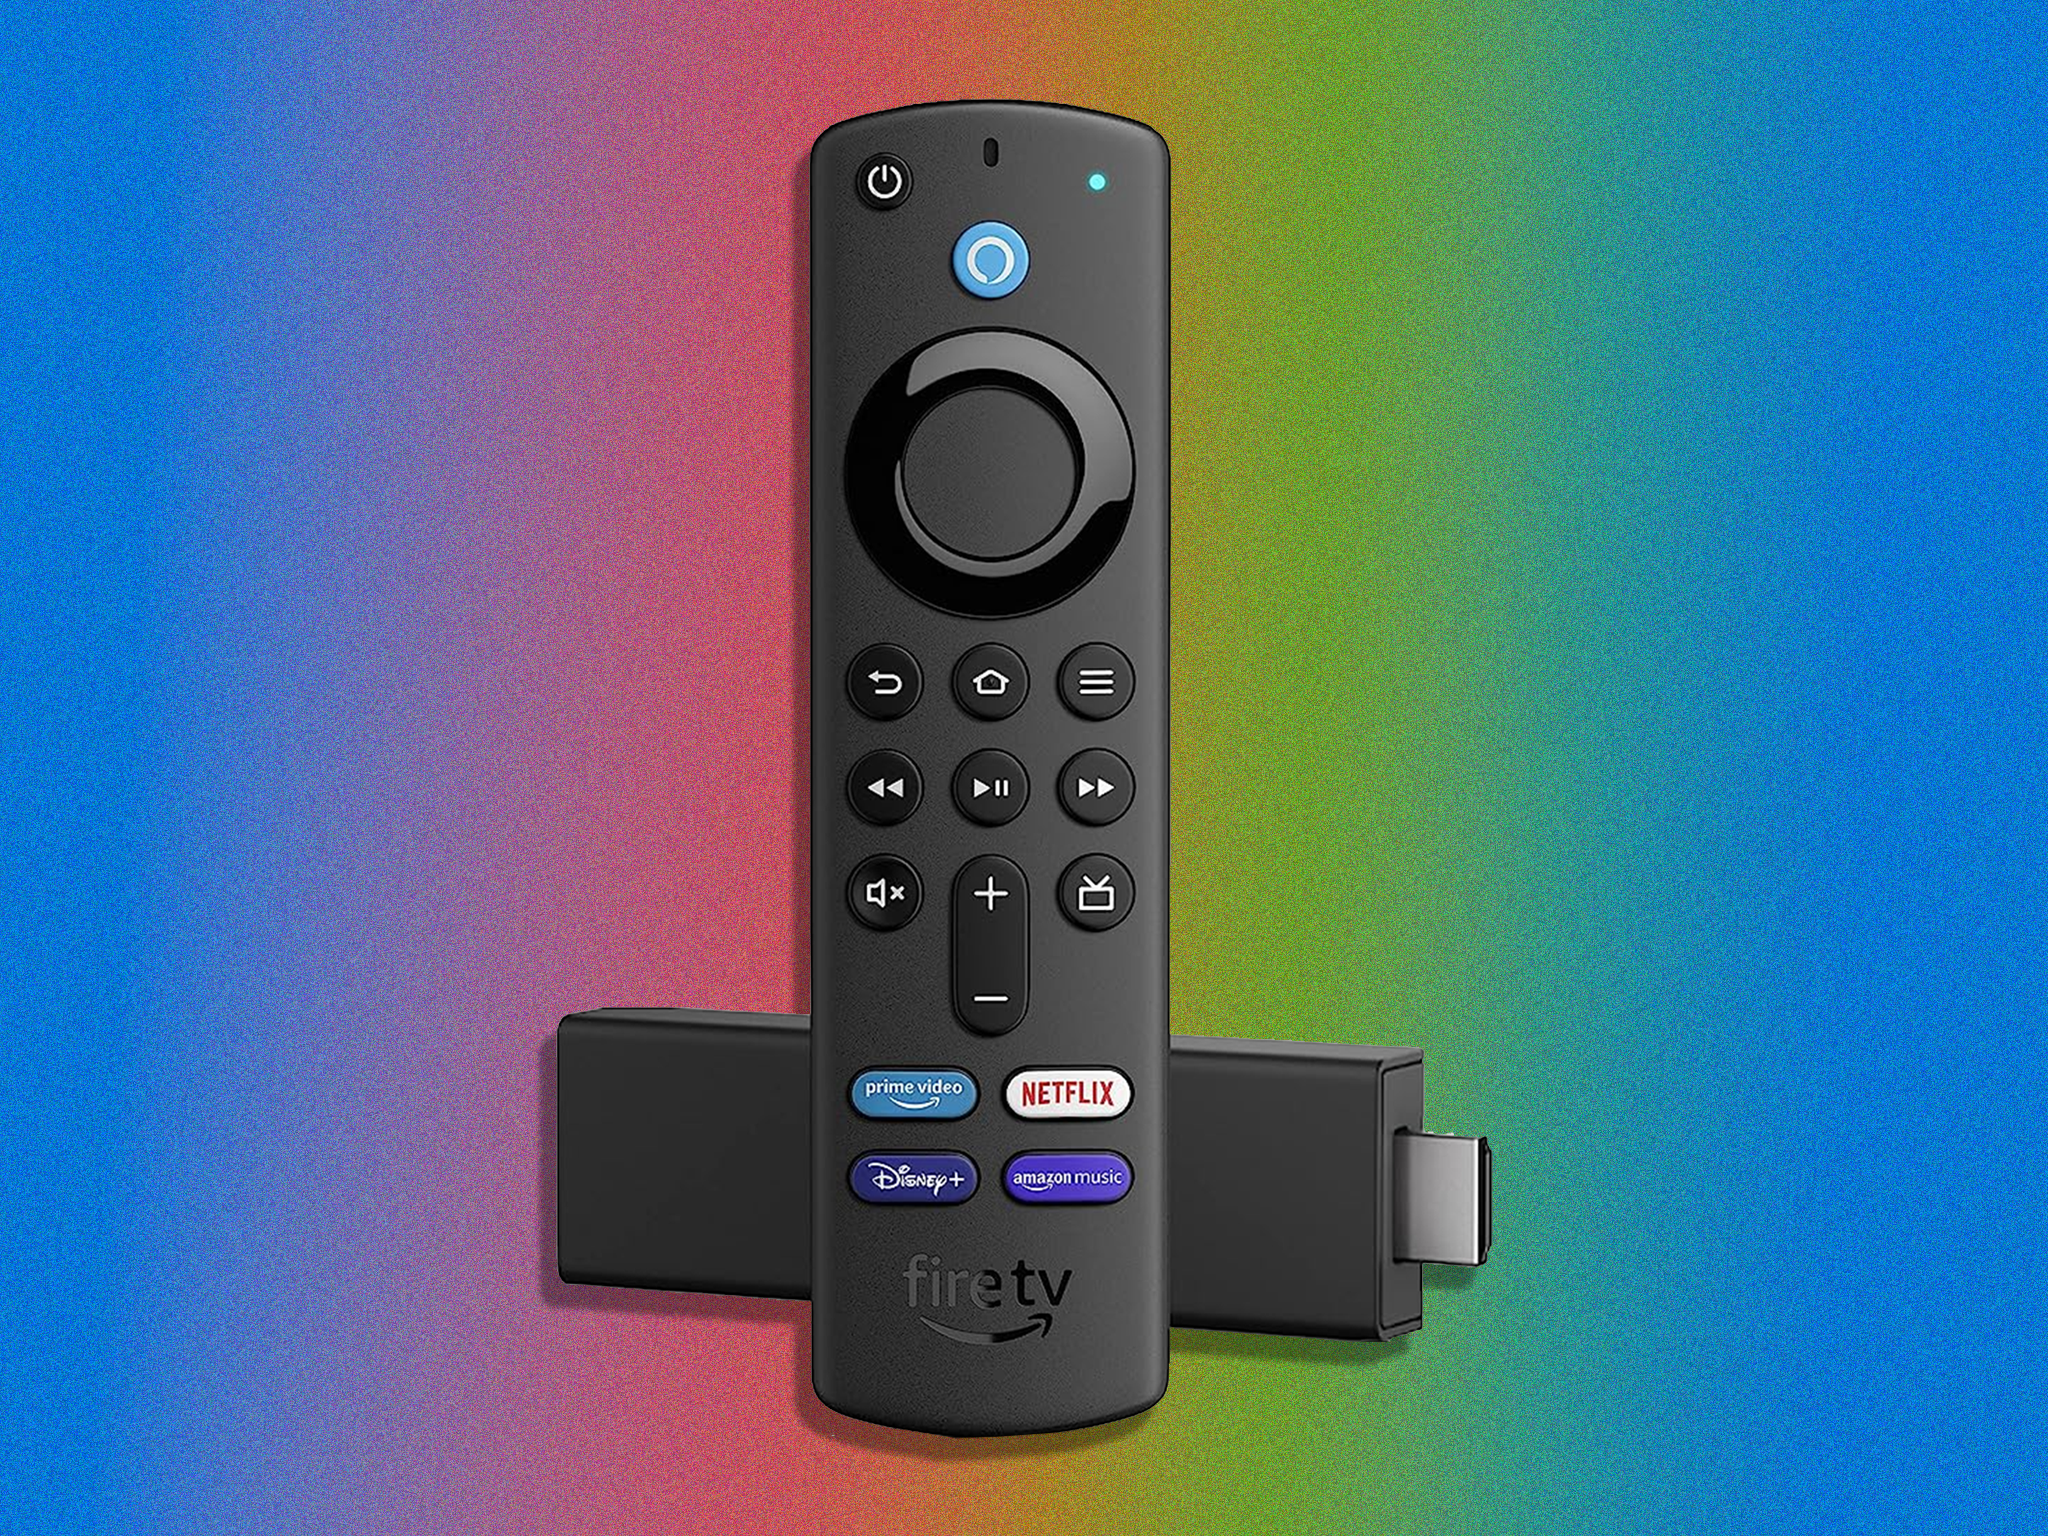 Several versions of the Fire TV stick are reduced for Prime Day